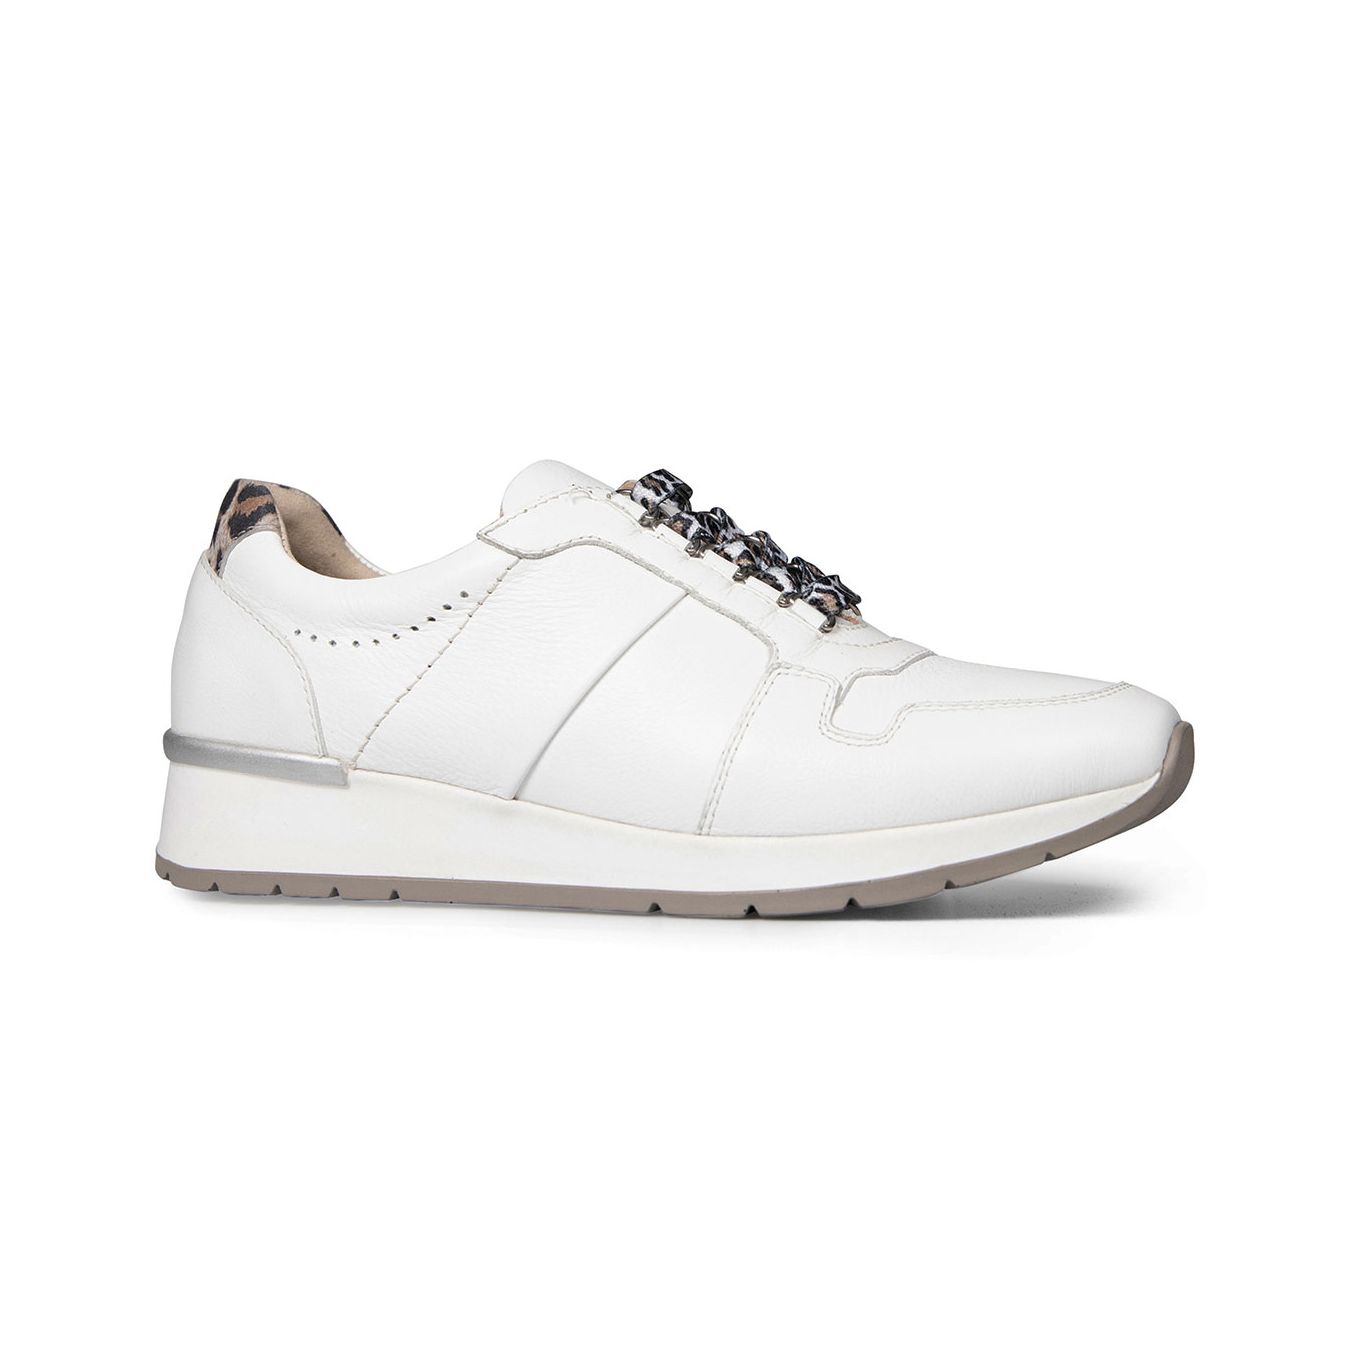 Van Dal Reydon 3317 0001 Ladies White Leather Lace Up Trainers